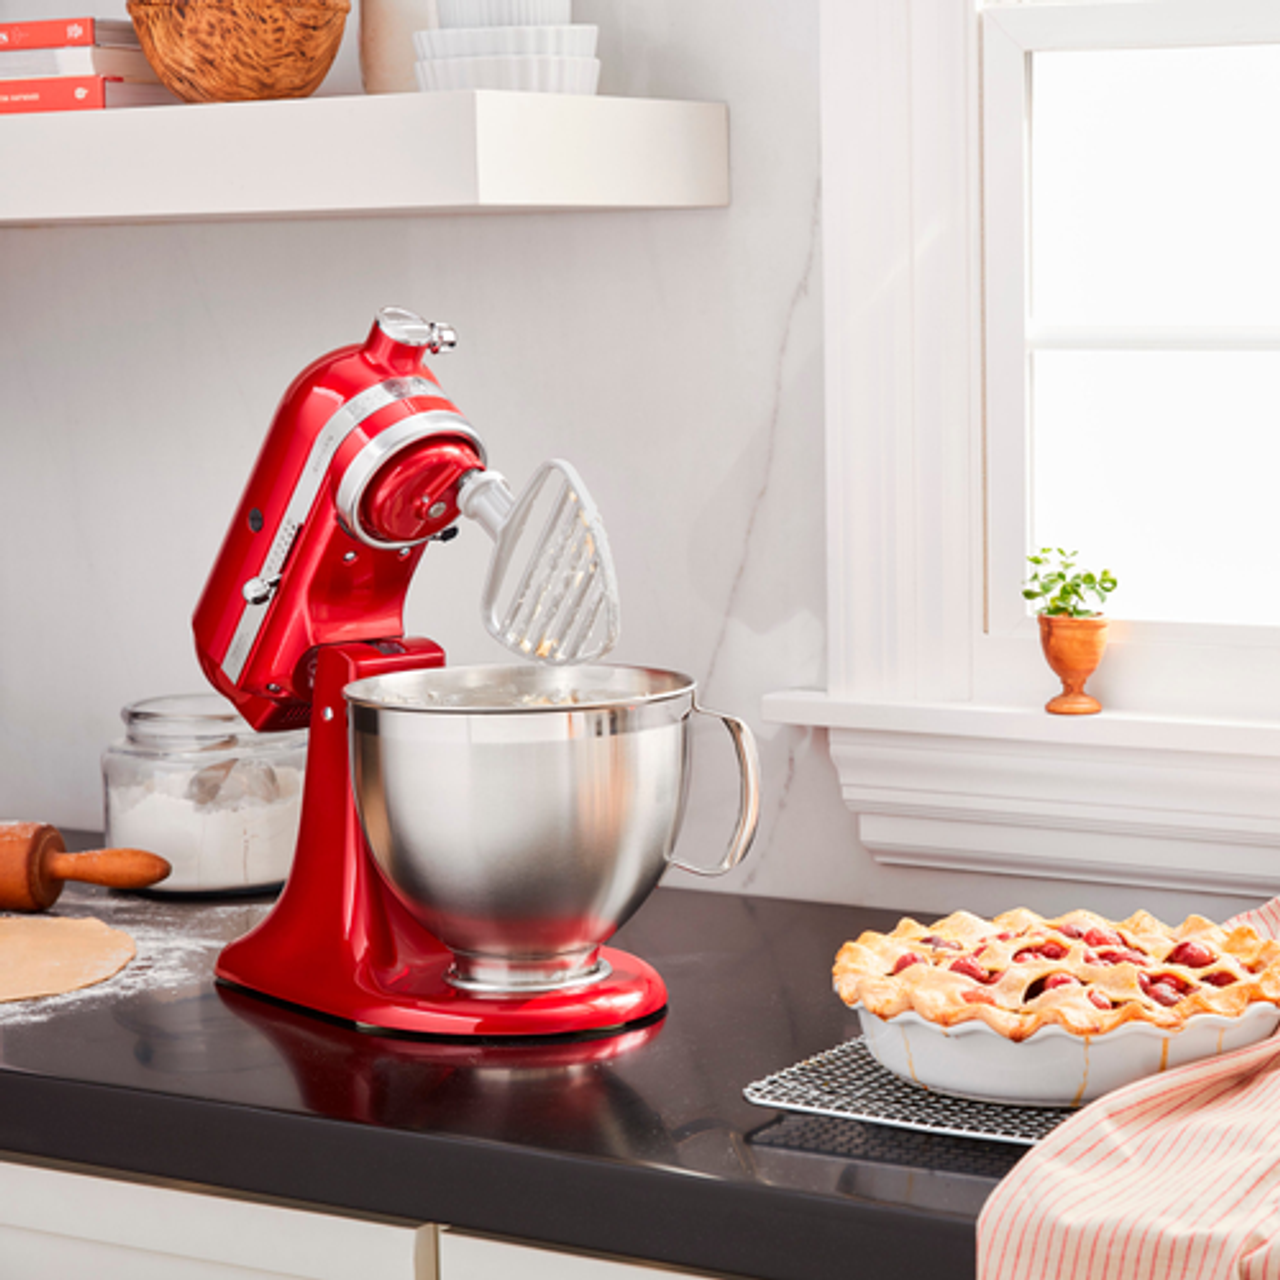 KitchenAid - Pastry Beater for KitchenAid® Tilt Head Stand Mixers - subtle silver